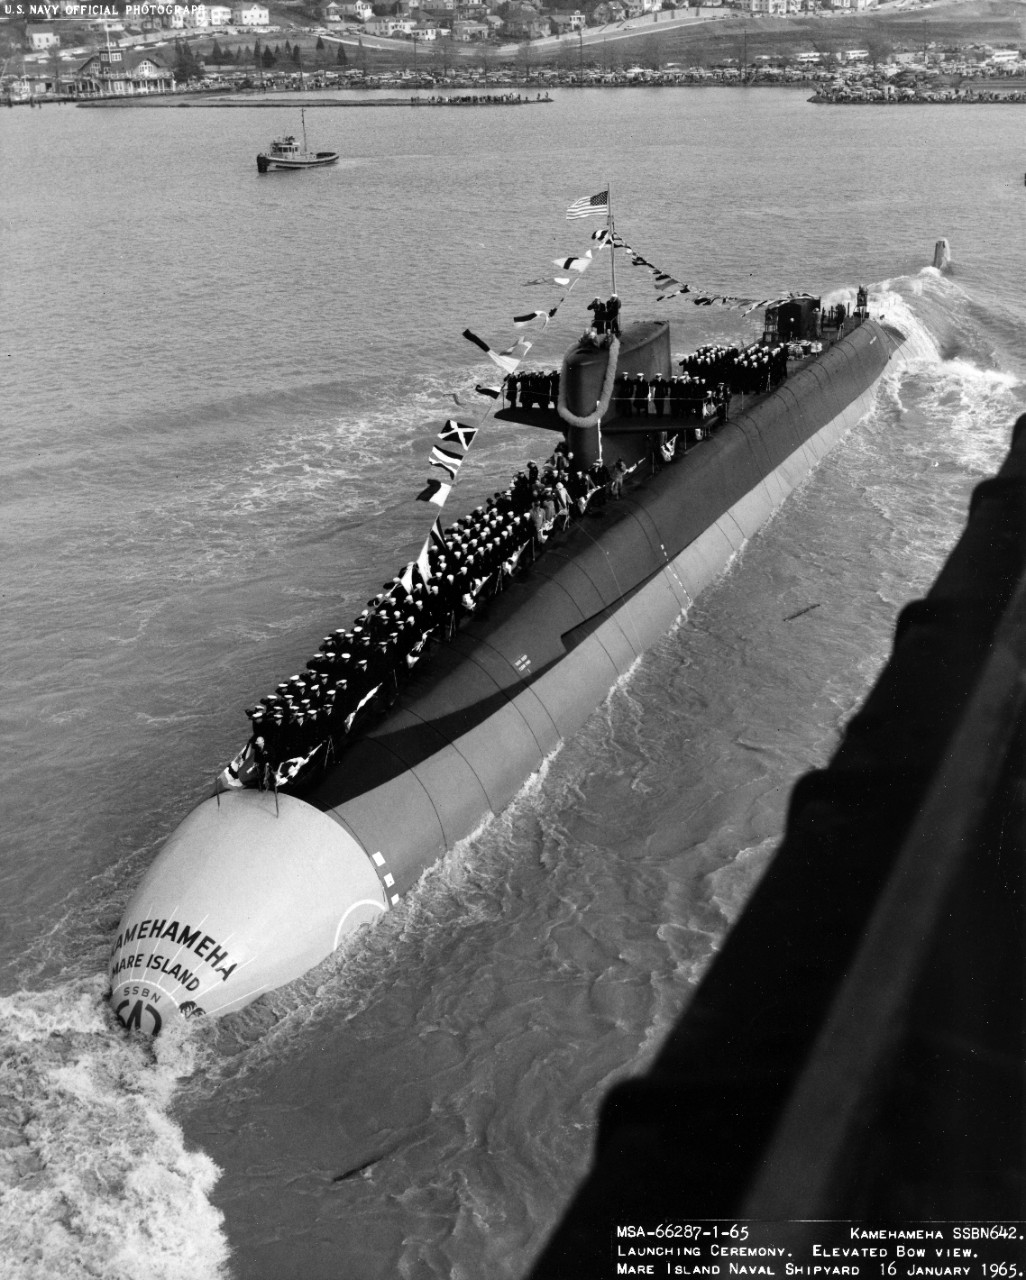 Launching ceremony of USS Kamehameha (SSBN-642) - elevated bow view at the Mare Island Naval Shipyard, January 16, 1965. 